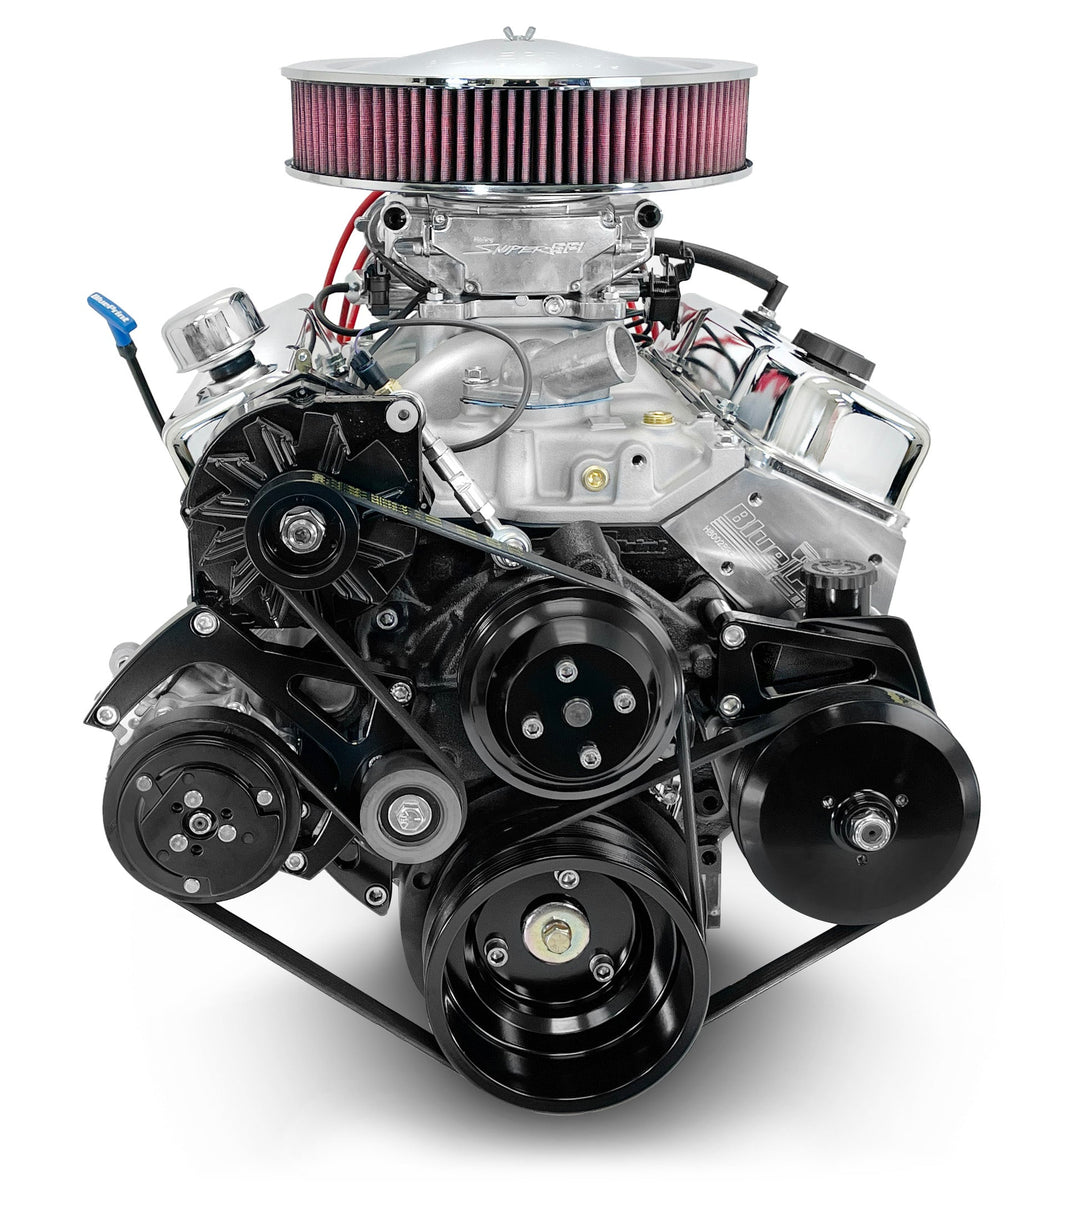 GM SB Compatible 350 c.i. Engine - 341 HP - Deluxe Dressed with Black Pulley Kit - Fuel Injected